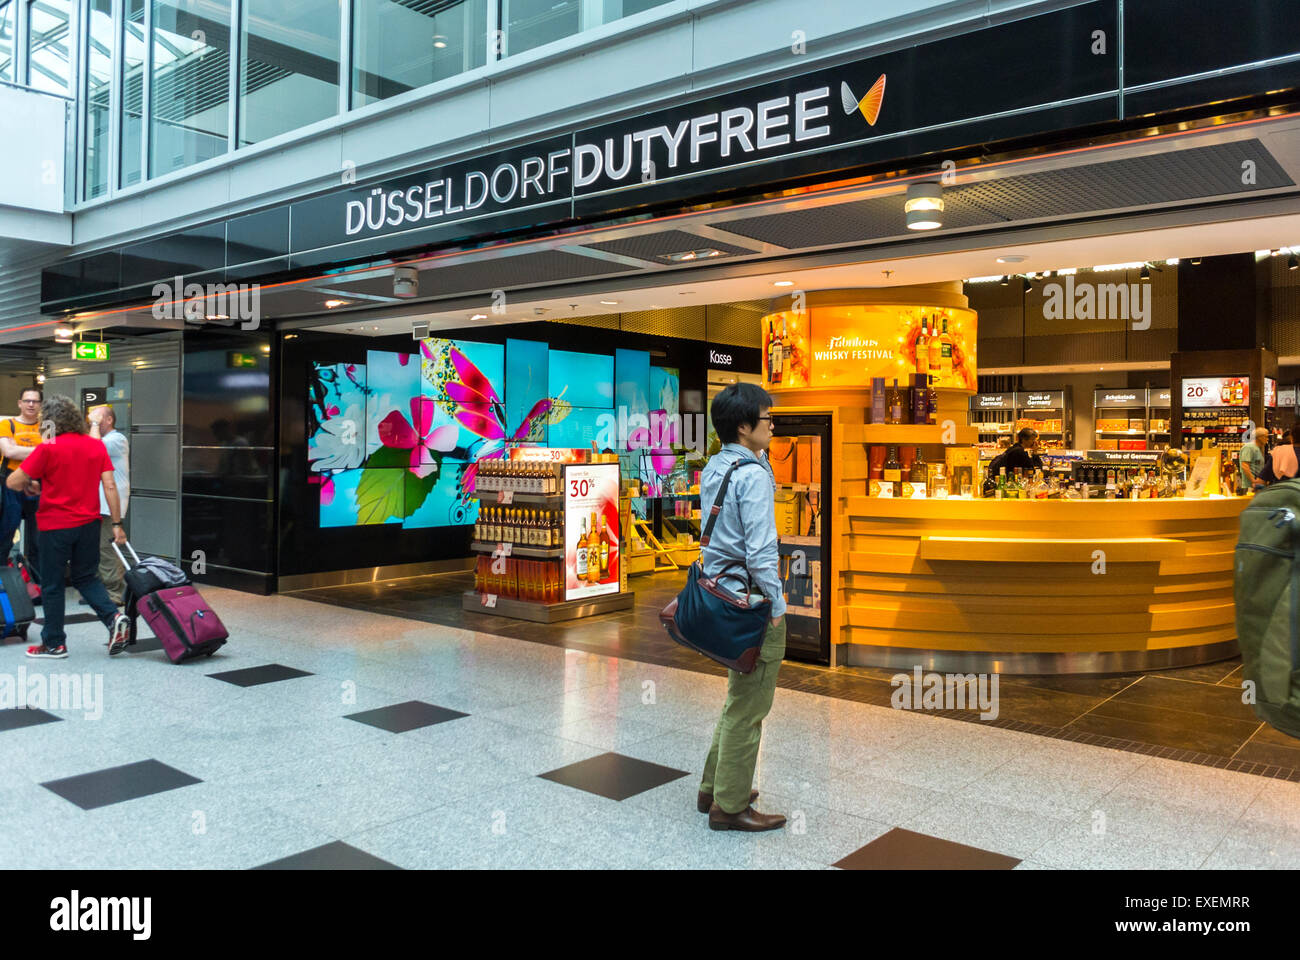 Duty Free Shop Dusseldorf Airport High Resolution Stock Photography and  Images - Alamy